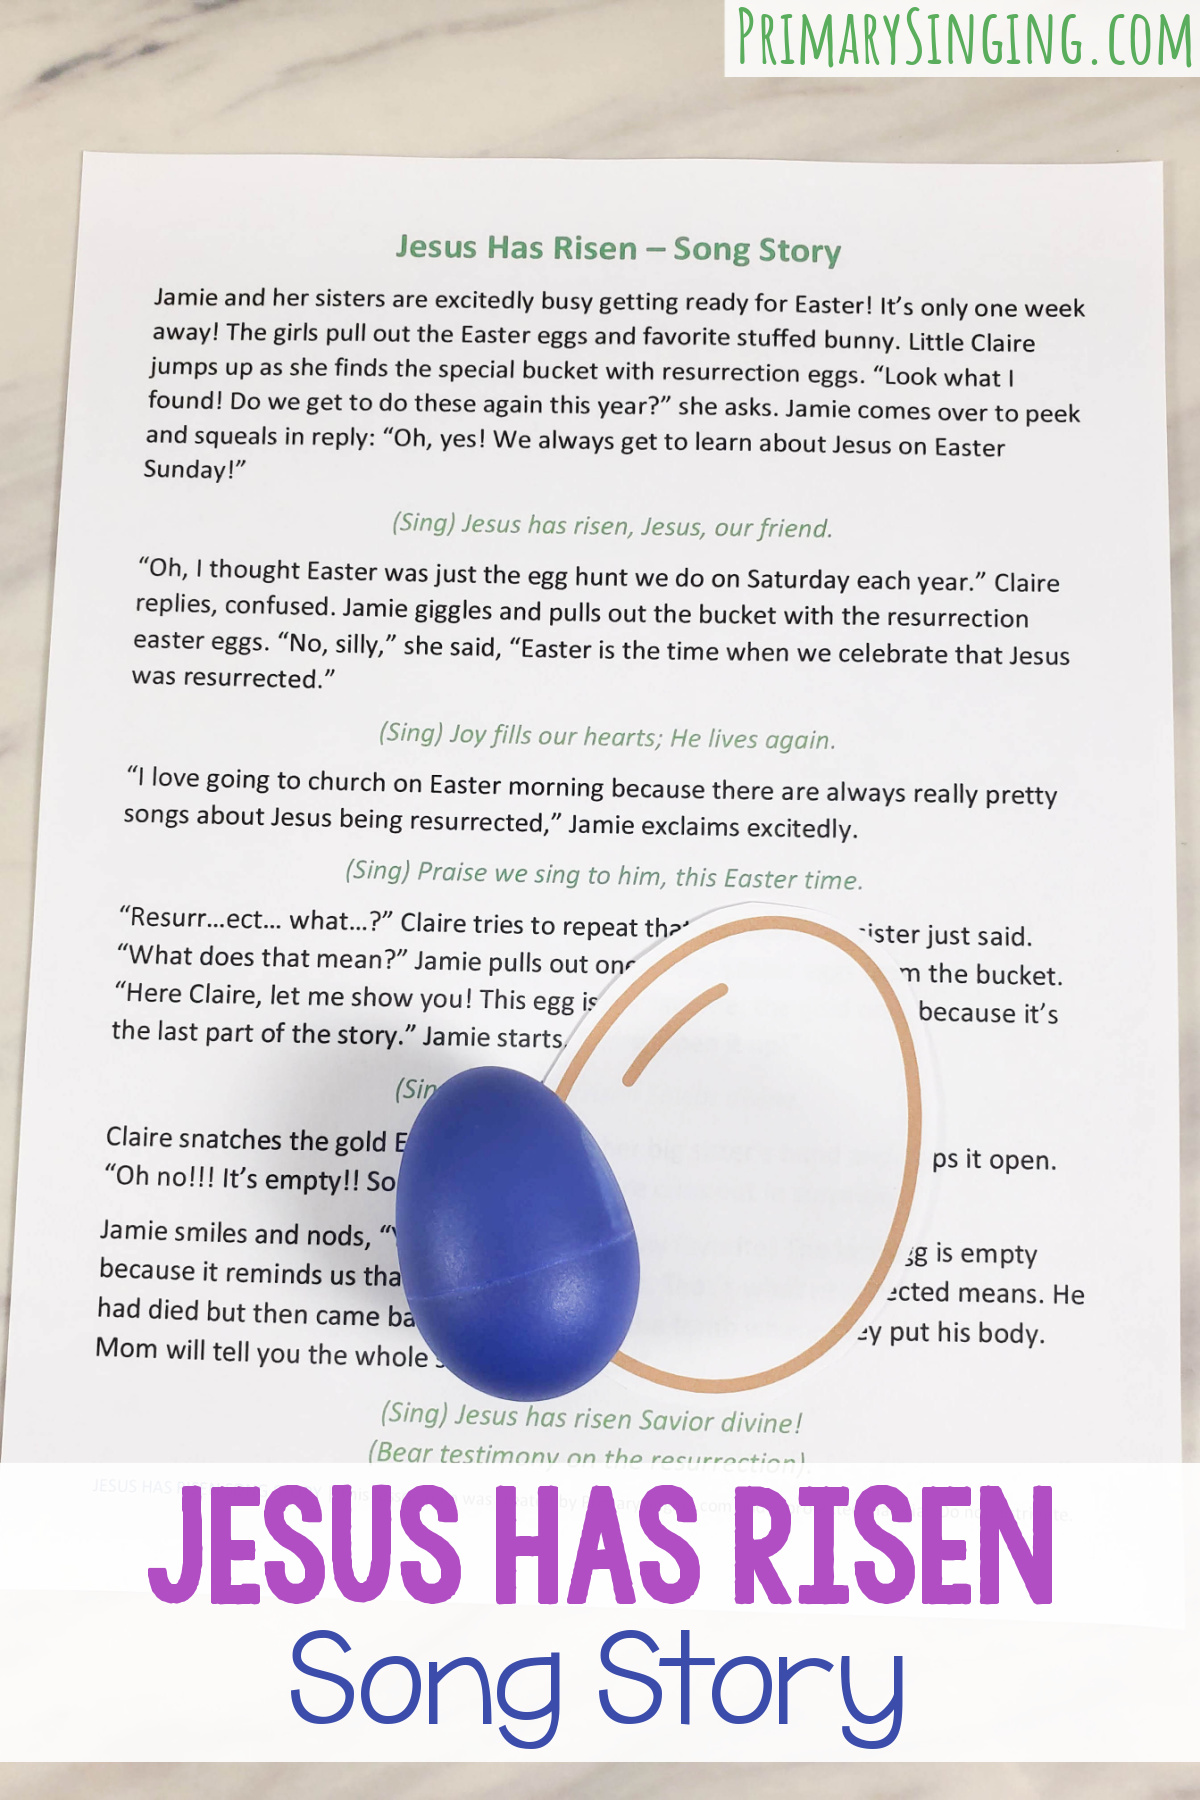 Jesus Has Risen Song Story - Share the song lyrics interwoven with a cute Easter story to teach this song for LDS Primary music leaders in singing time including lesson plan and printable